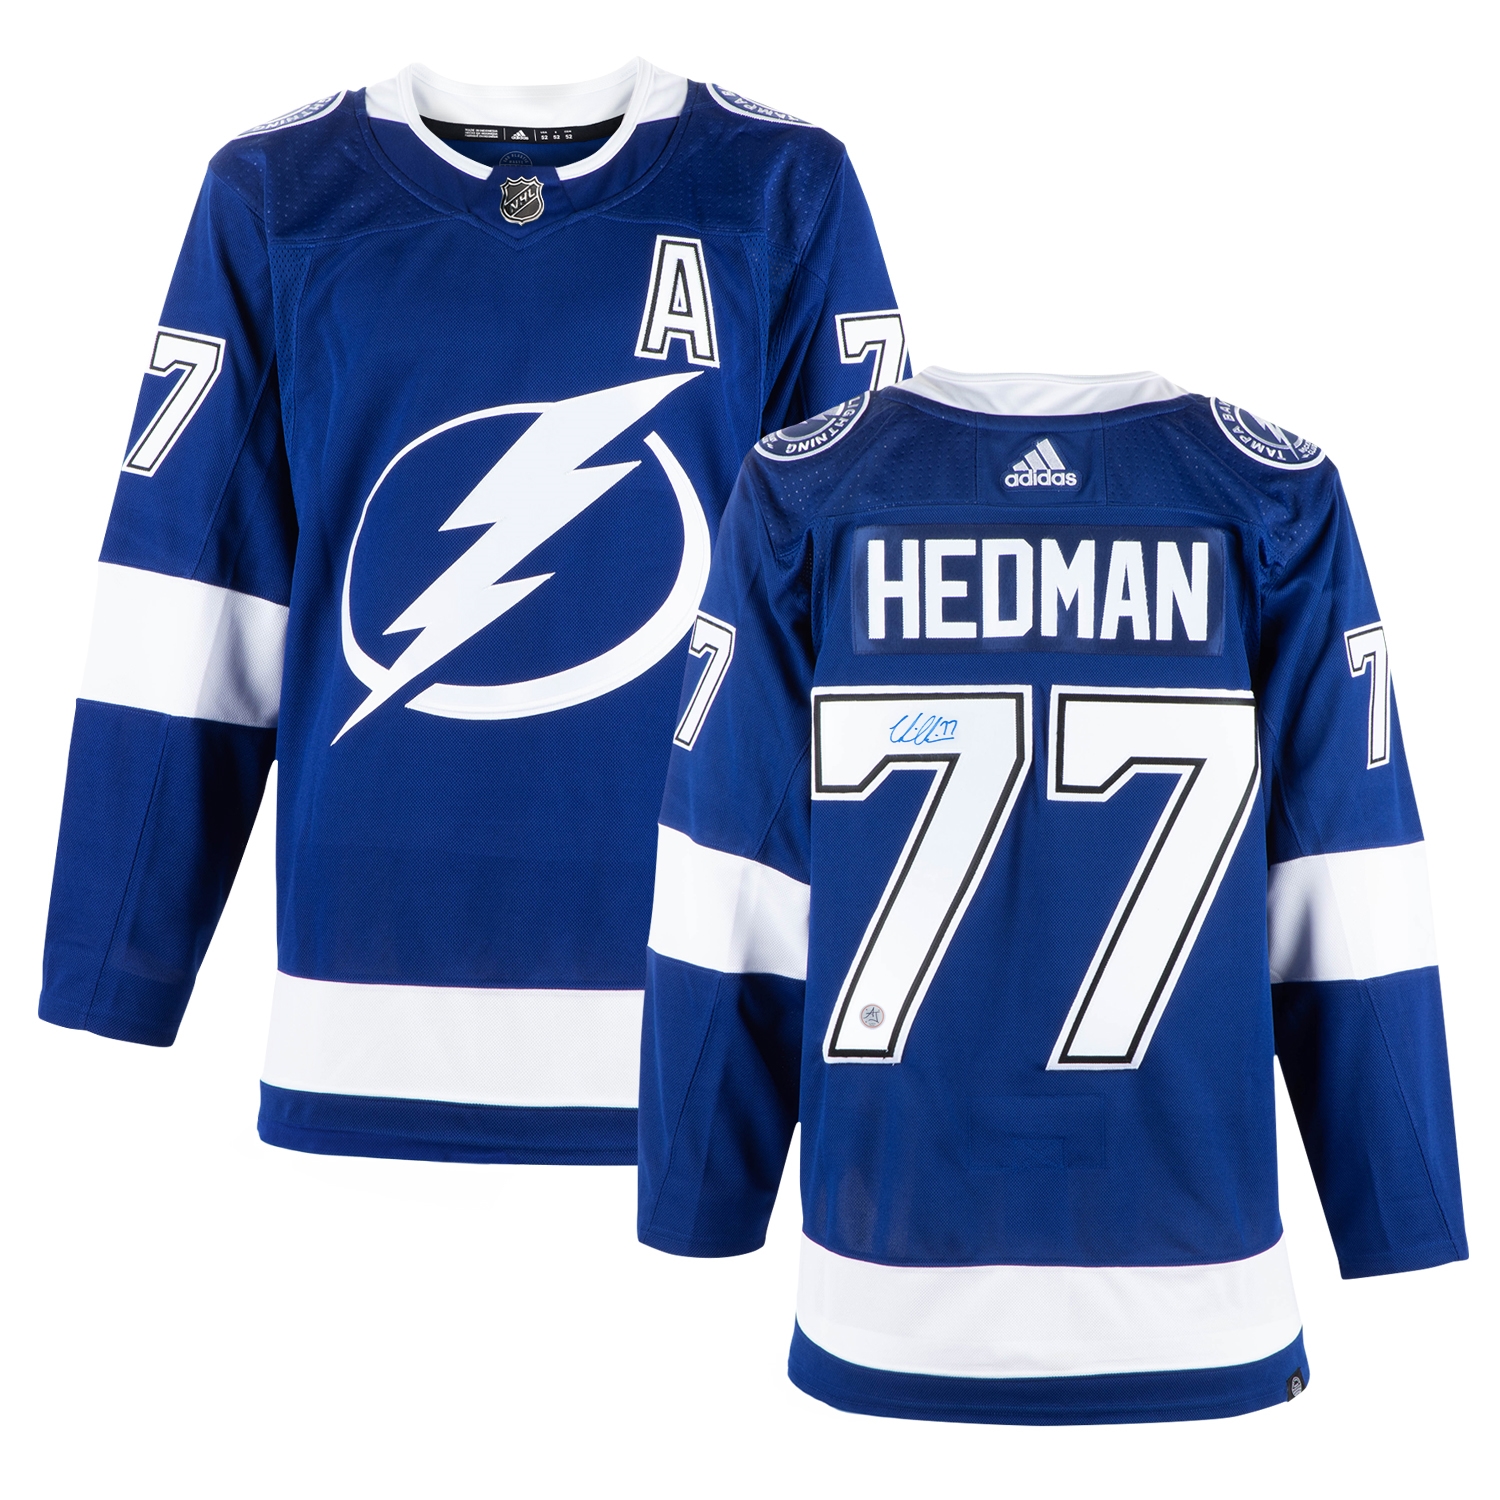 Victor Hedman Tampa Bay Lightning Autographed adidas Jersey